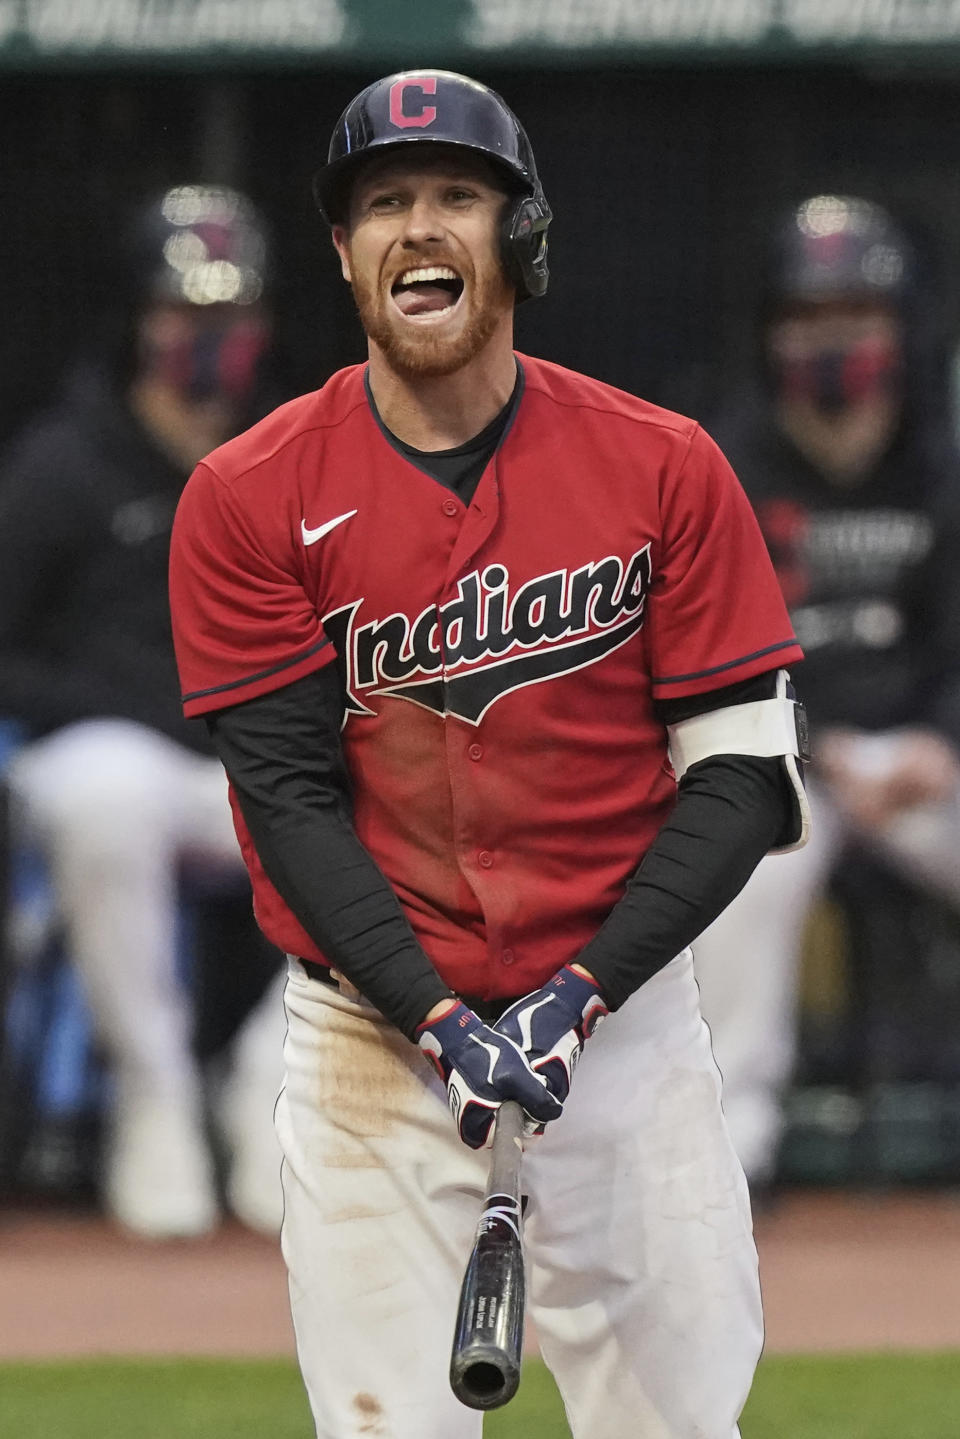 Cleveland Indians' Jordan Luplow reacts to strike two in the fourth inning in a baseball game against the Chicago White Sox, Tuesday, April 20, 2021, in Cleveland. Luplow struck out swinging. (AP Photo/Tony Dejak)